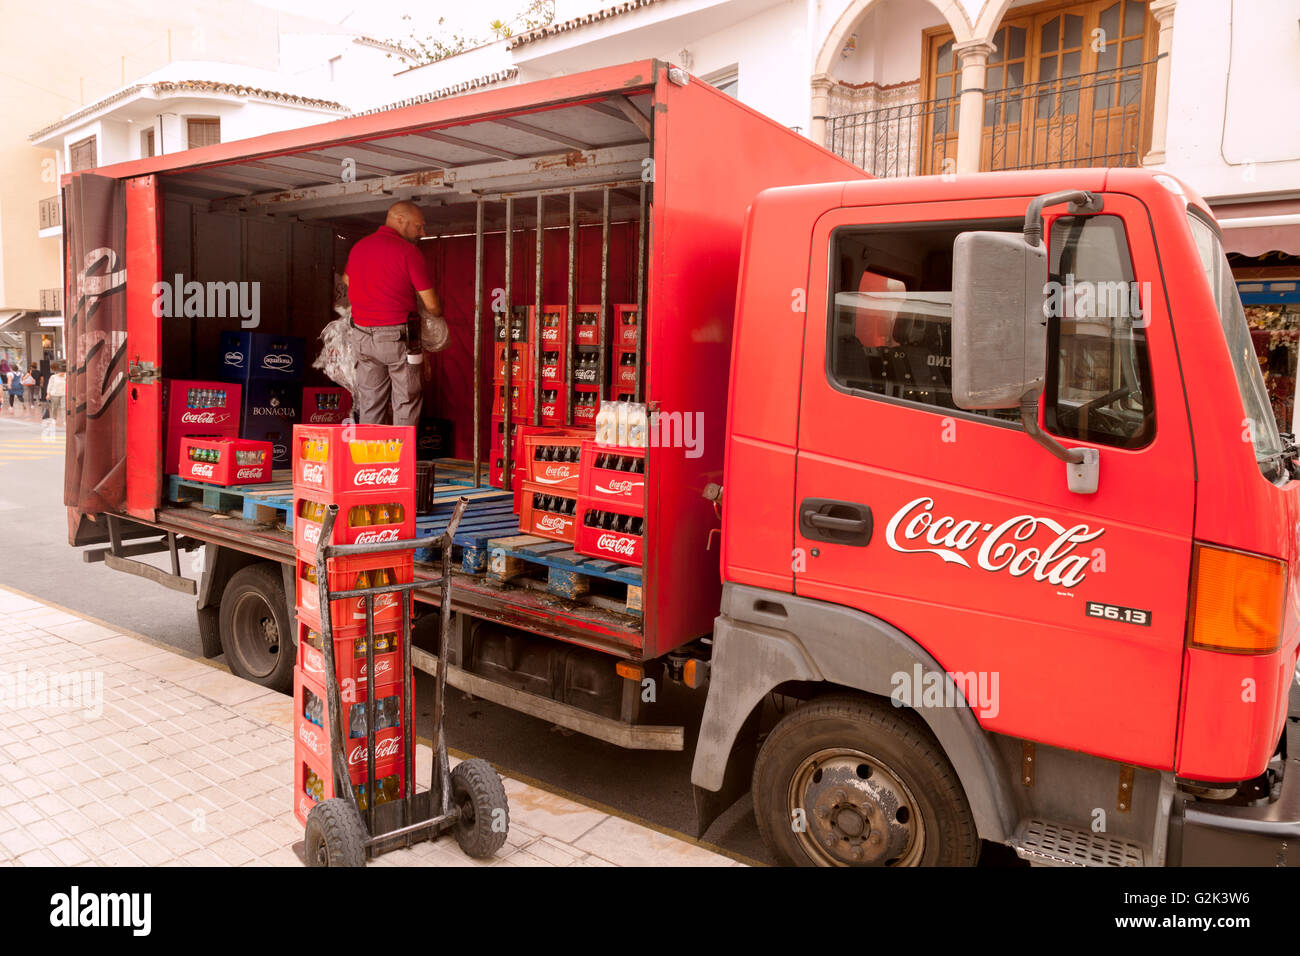 Coca Cola delivery van and staff unloading Cola bottles, Gibraltar Europe Stock Photo